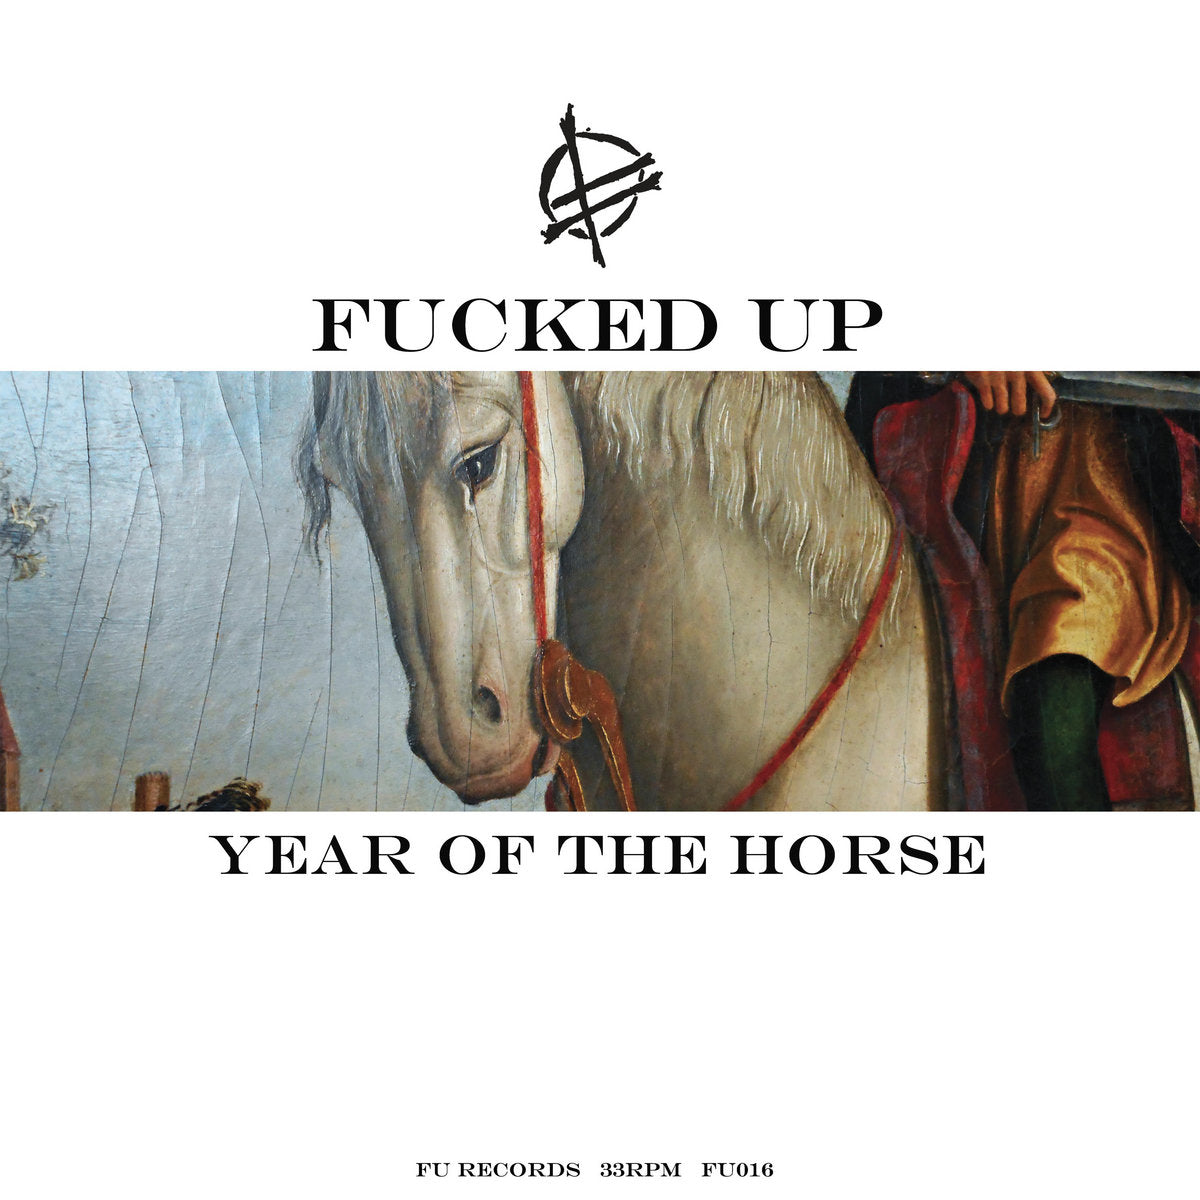 FUCKED UP "Year Of The Horse" Tape